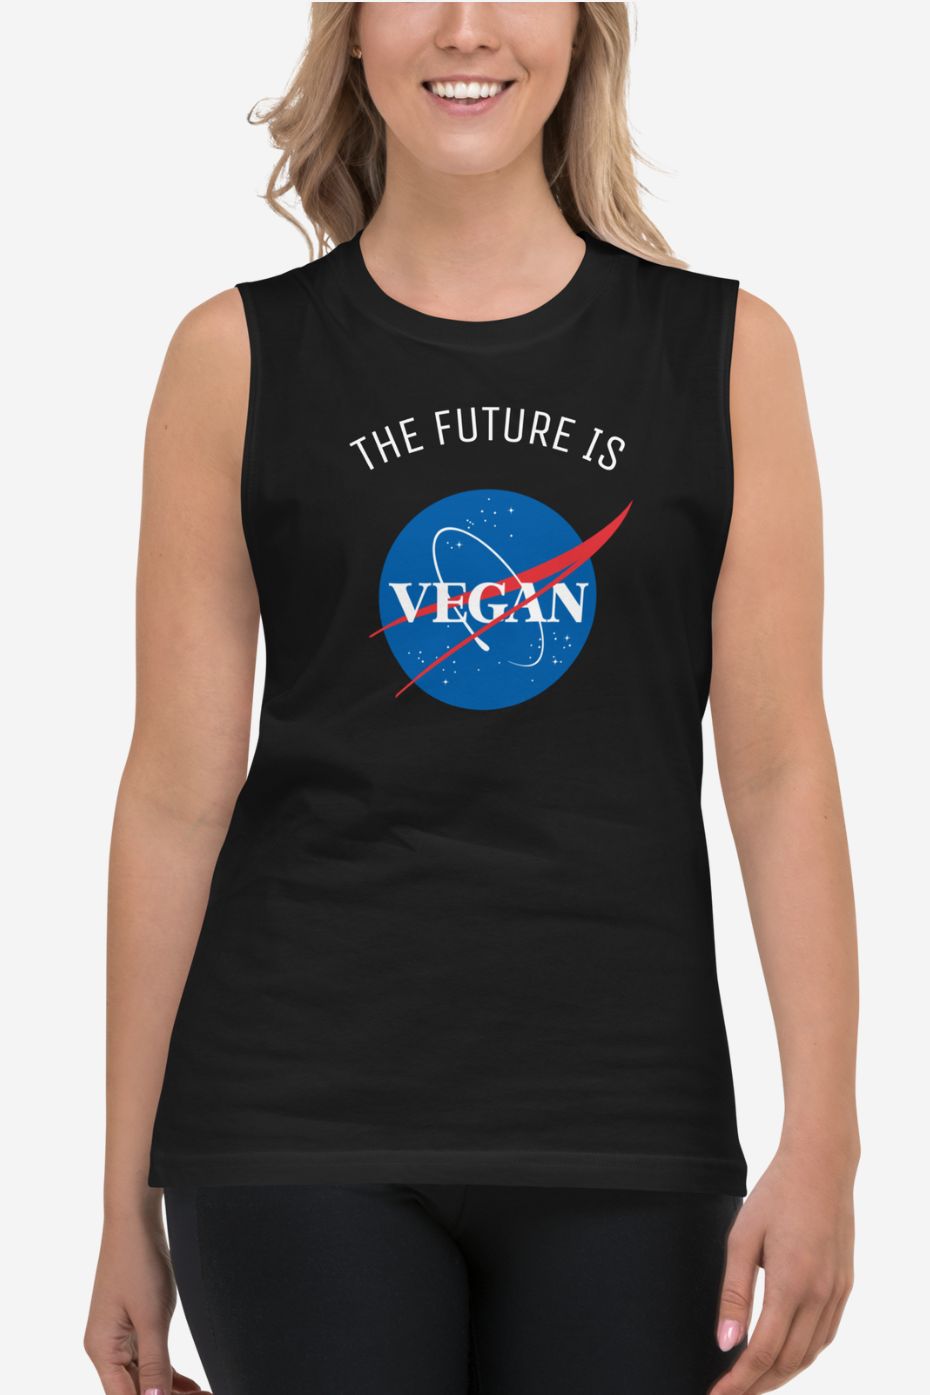 The Future is Vegan - Unisex Muscle Shirt